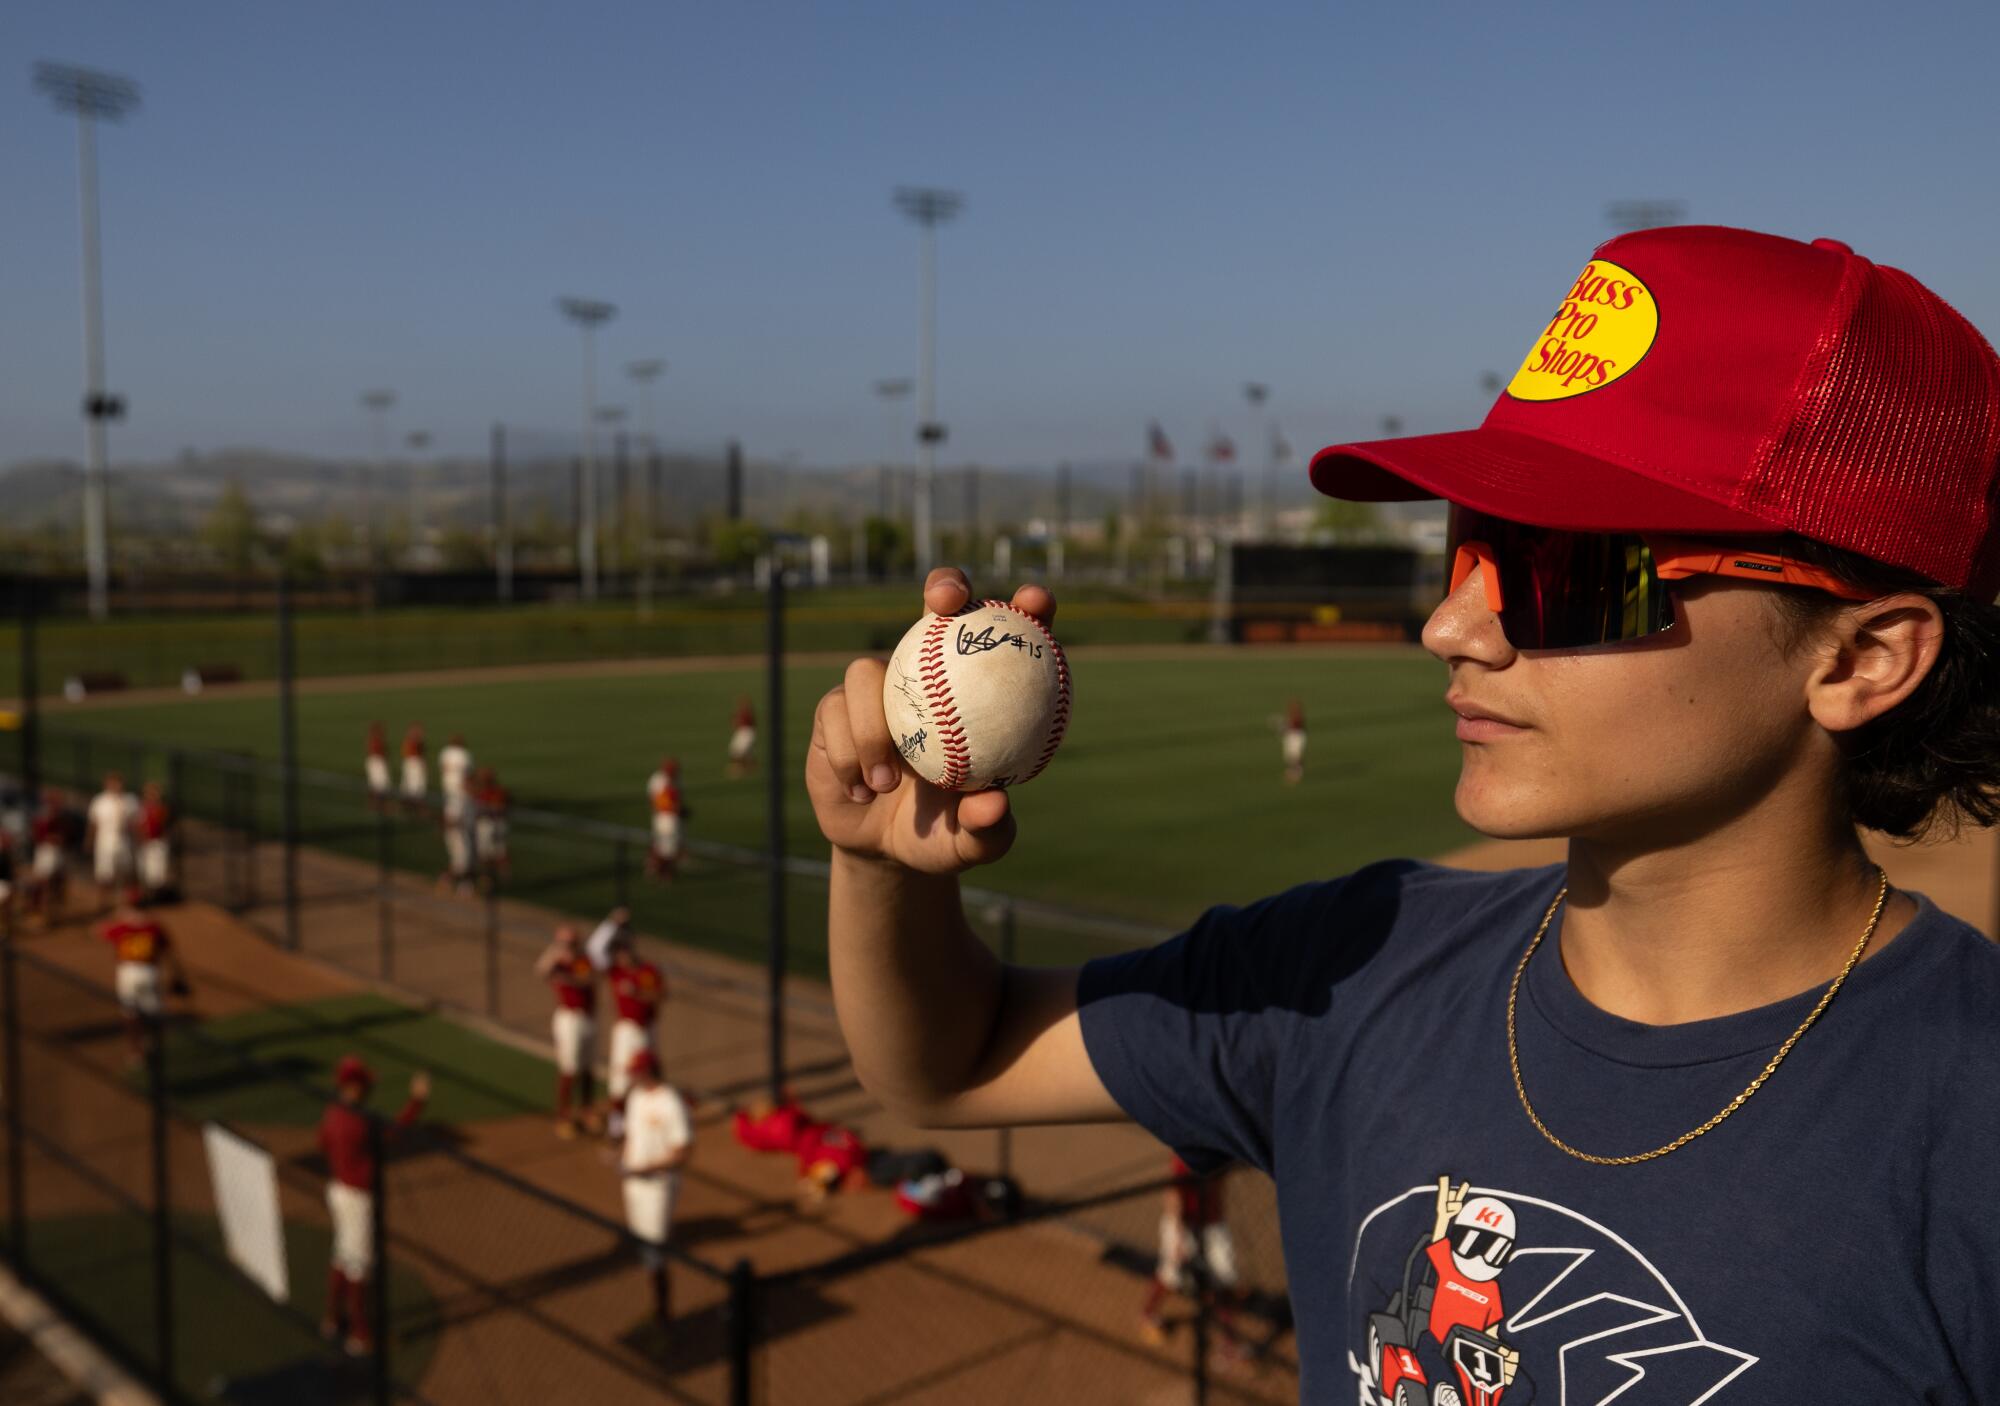 Josh Boatright, 14, of Irvine shows off his autograph on a baseball from USC infielder Ethan Hedges before the game on May 3.